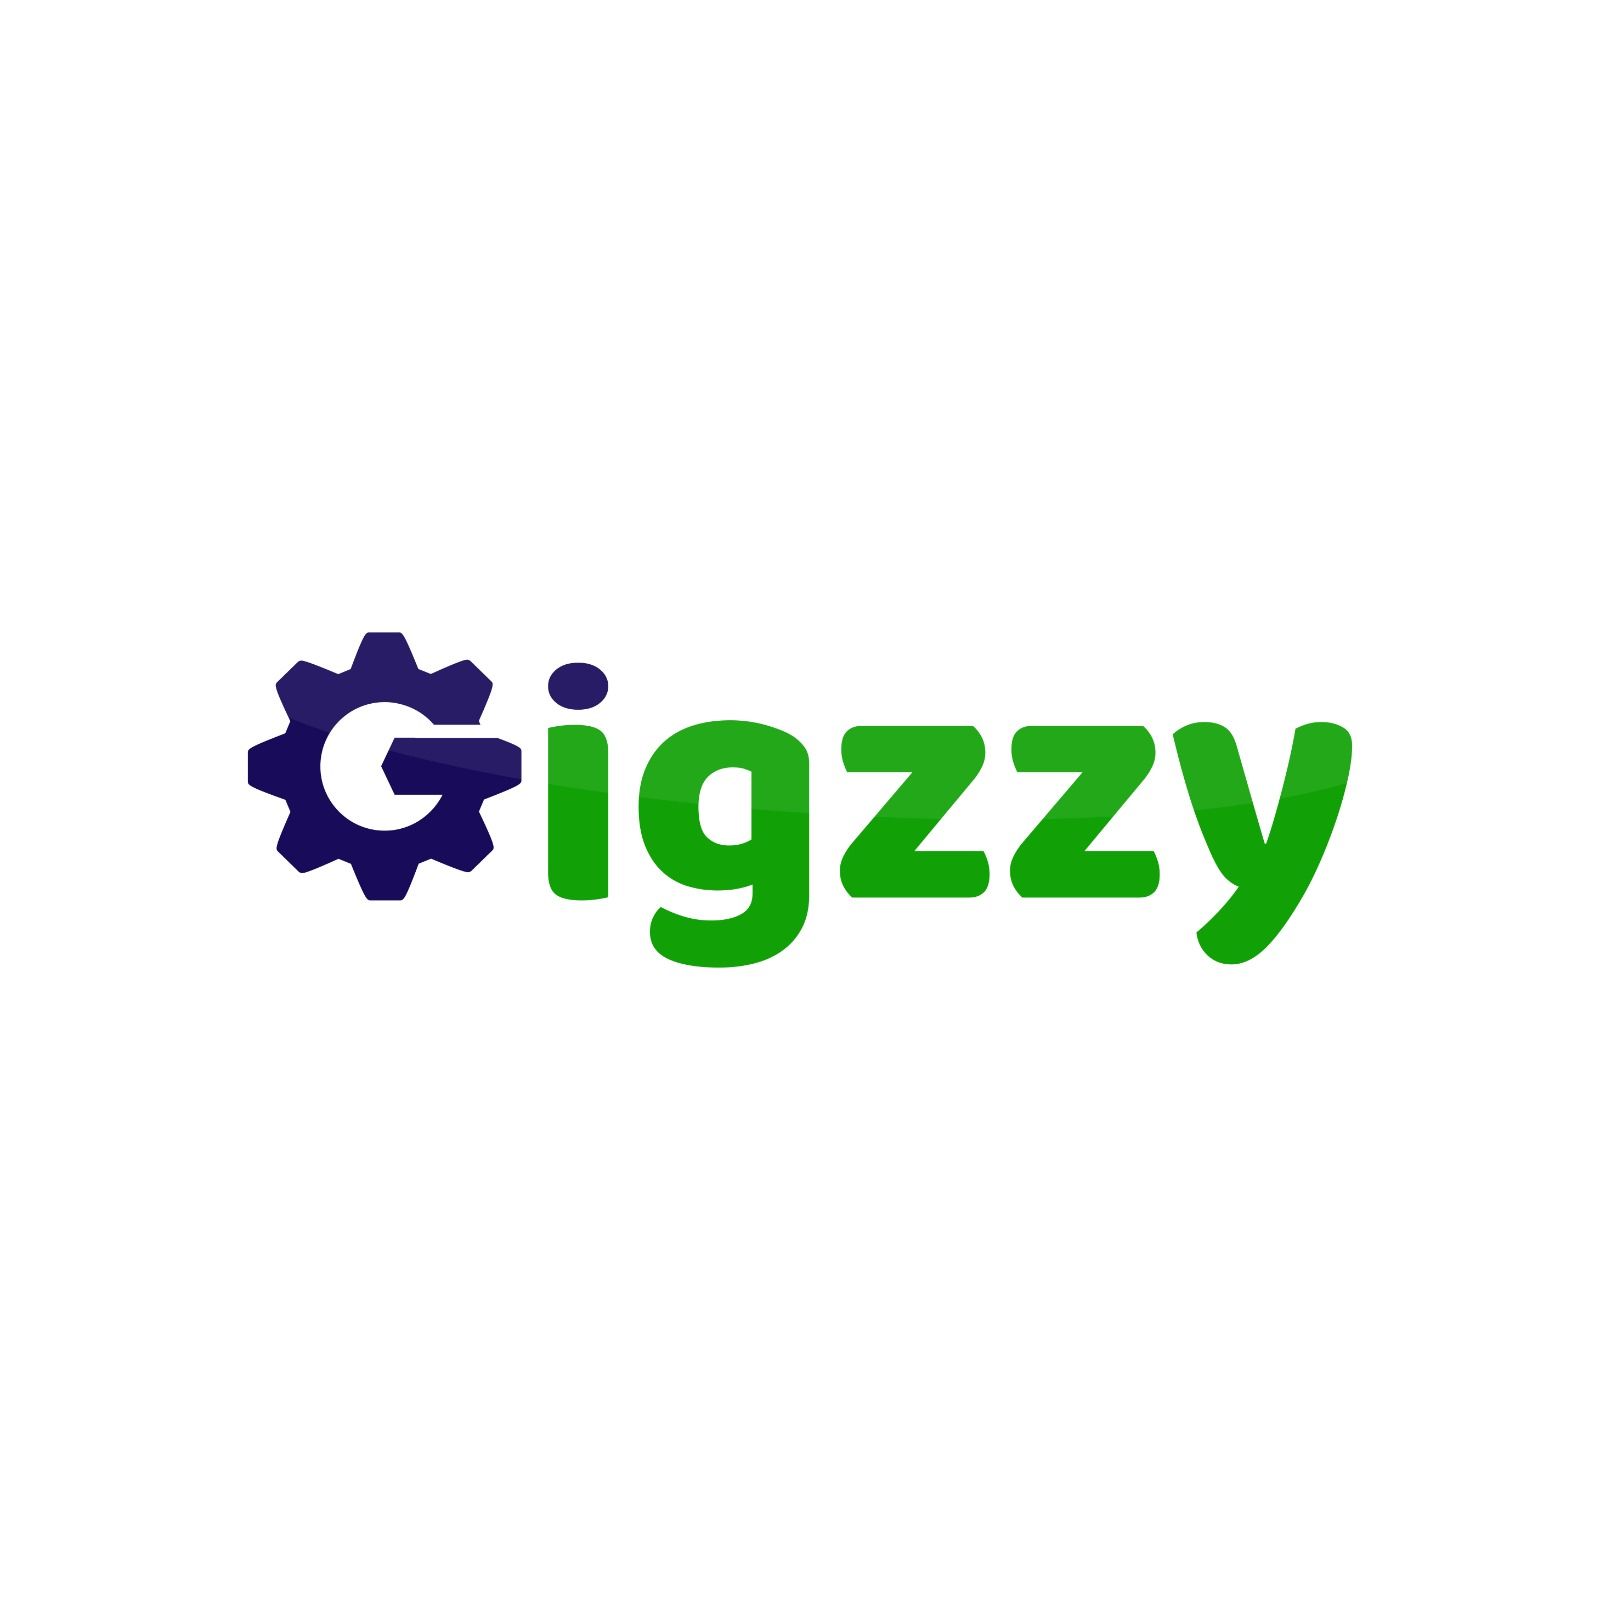 Your Home of Convenience - Gigzzy